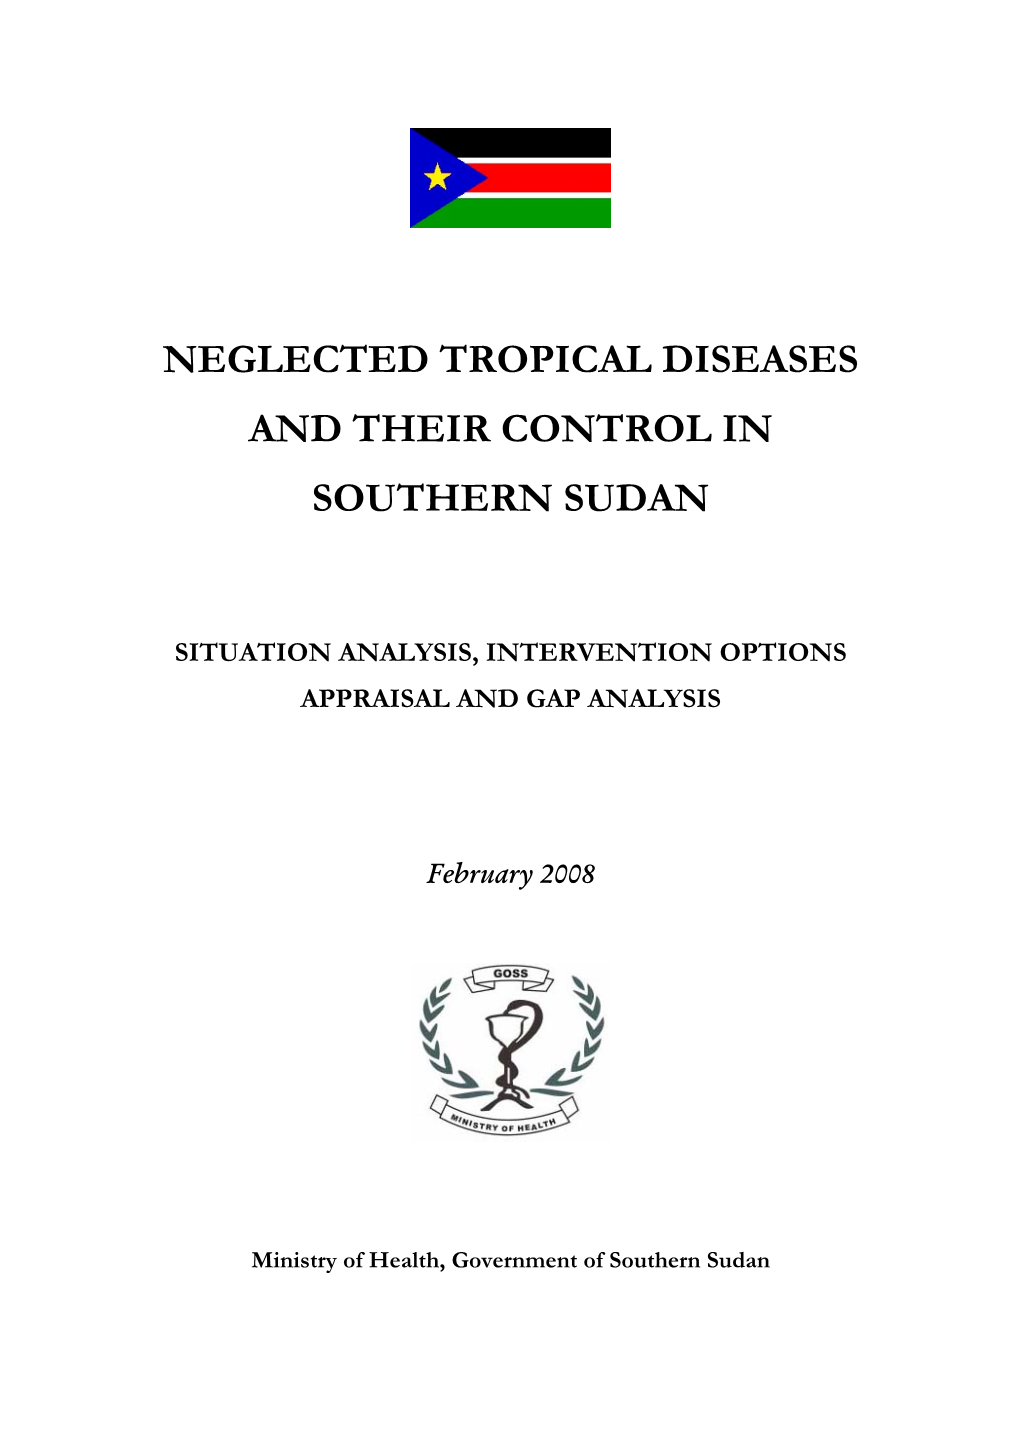 Neglected Tropical Diseases and Their Control in Southern Sudan